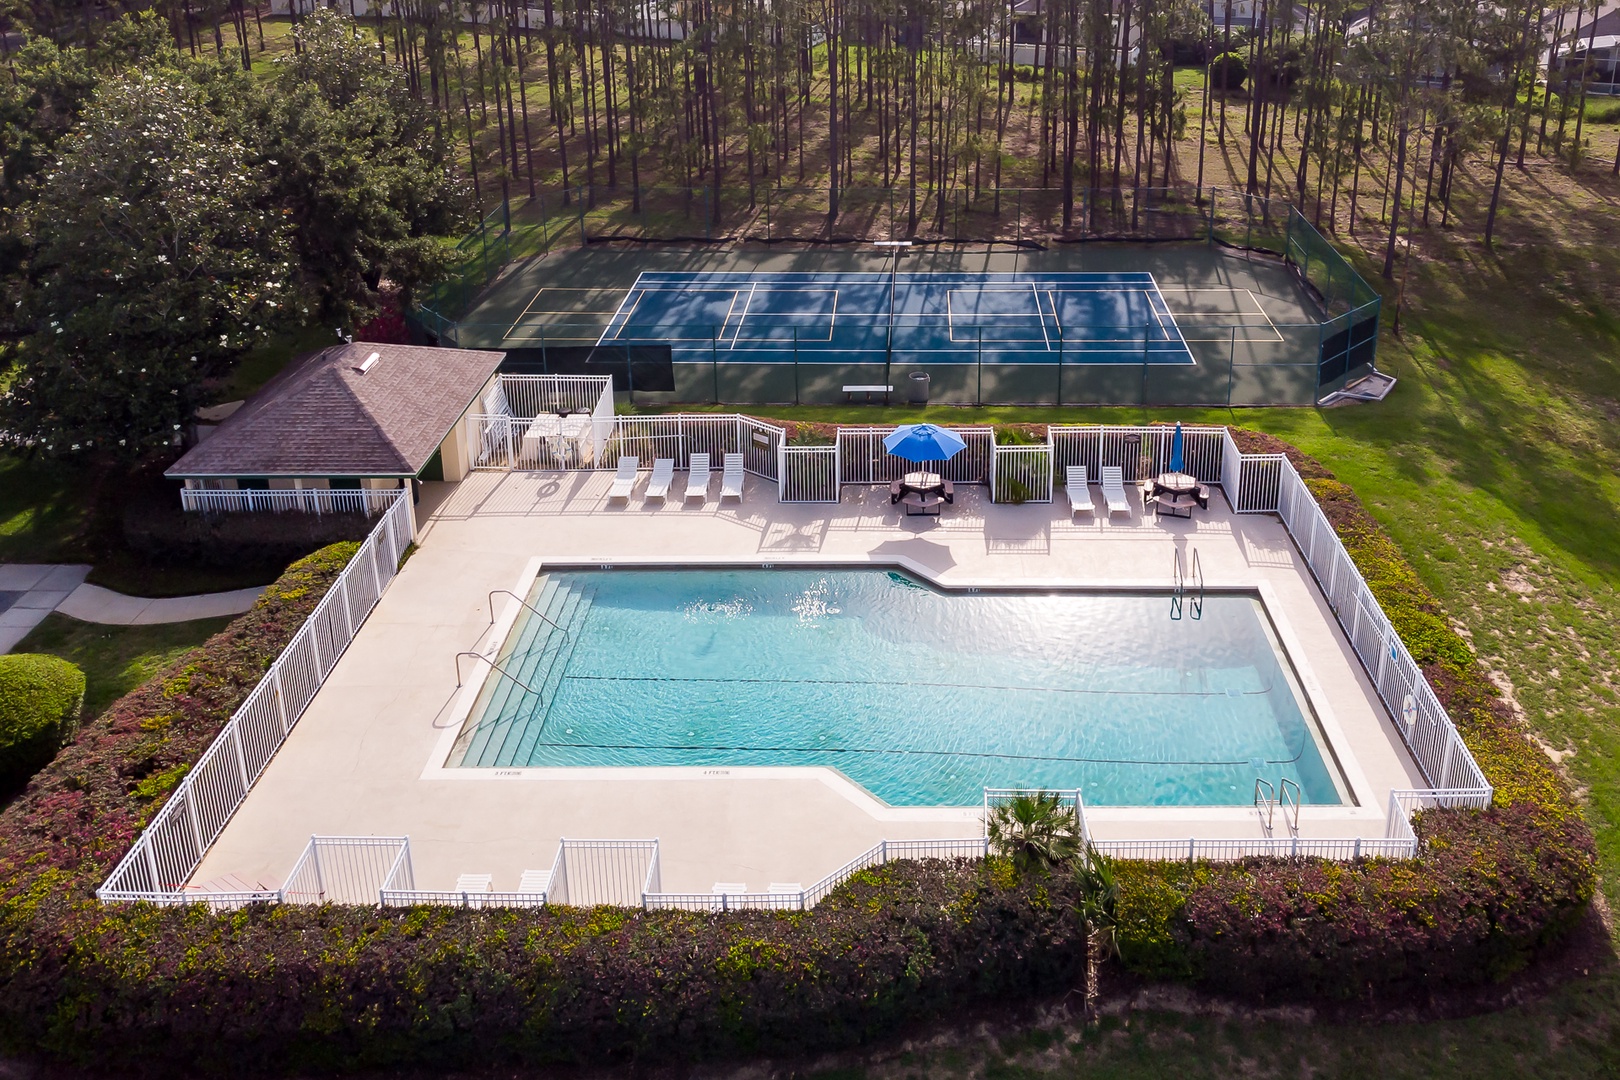 4 Highlands Reserve Pool and Tennis